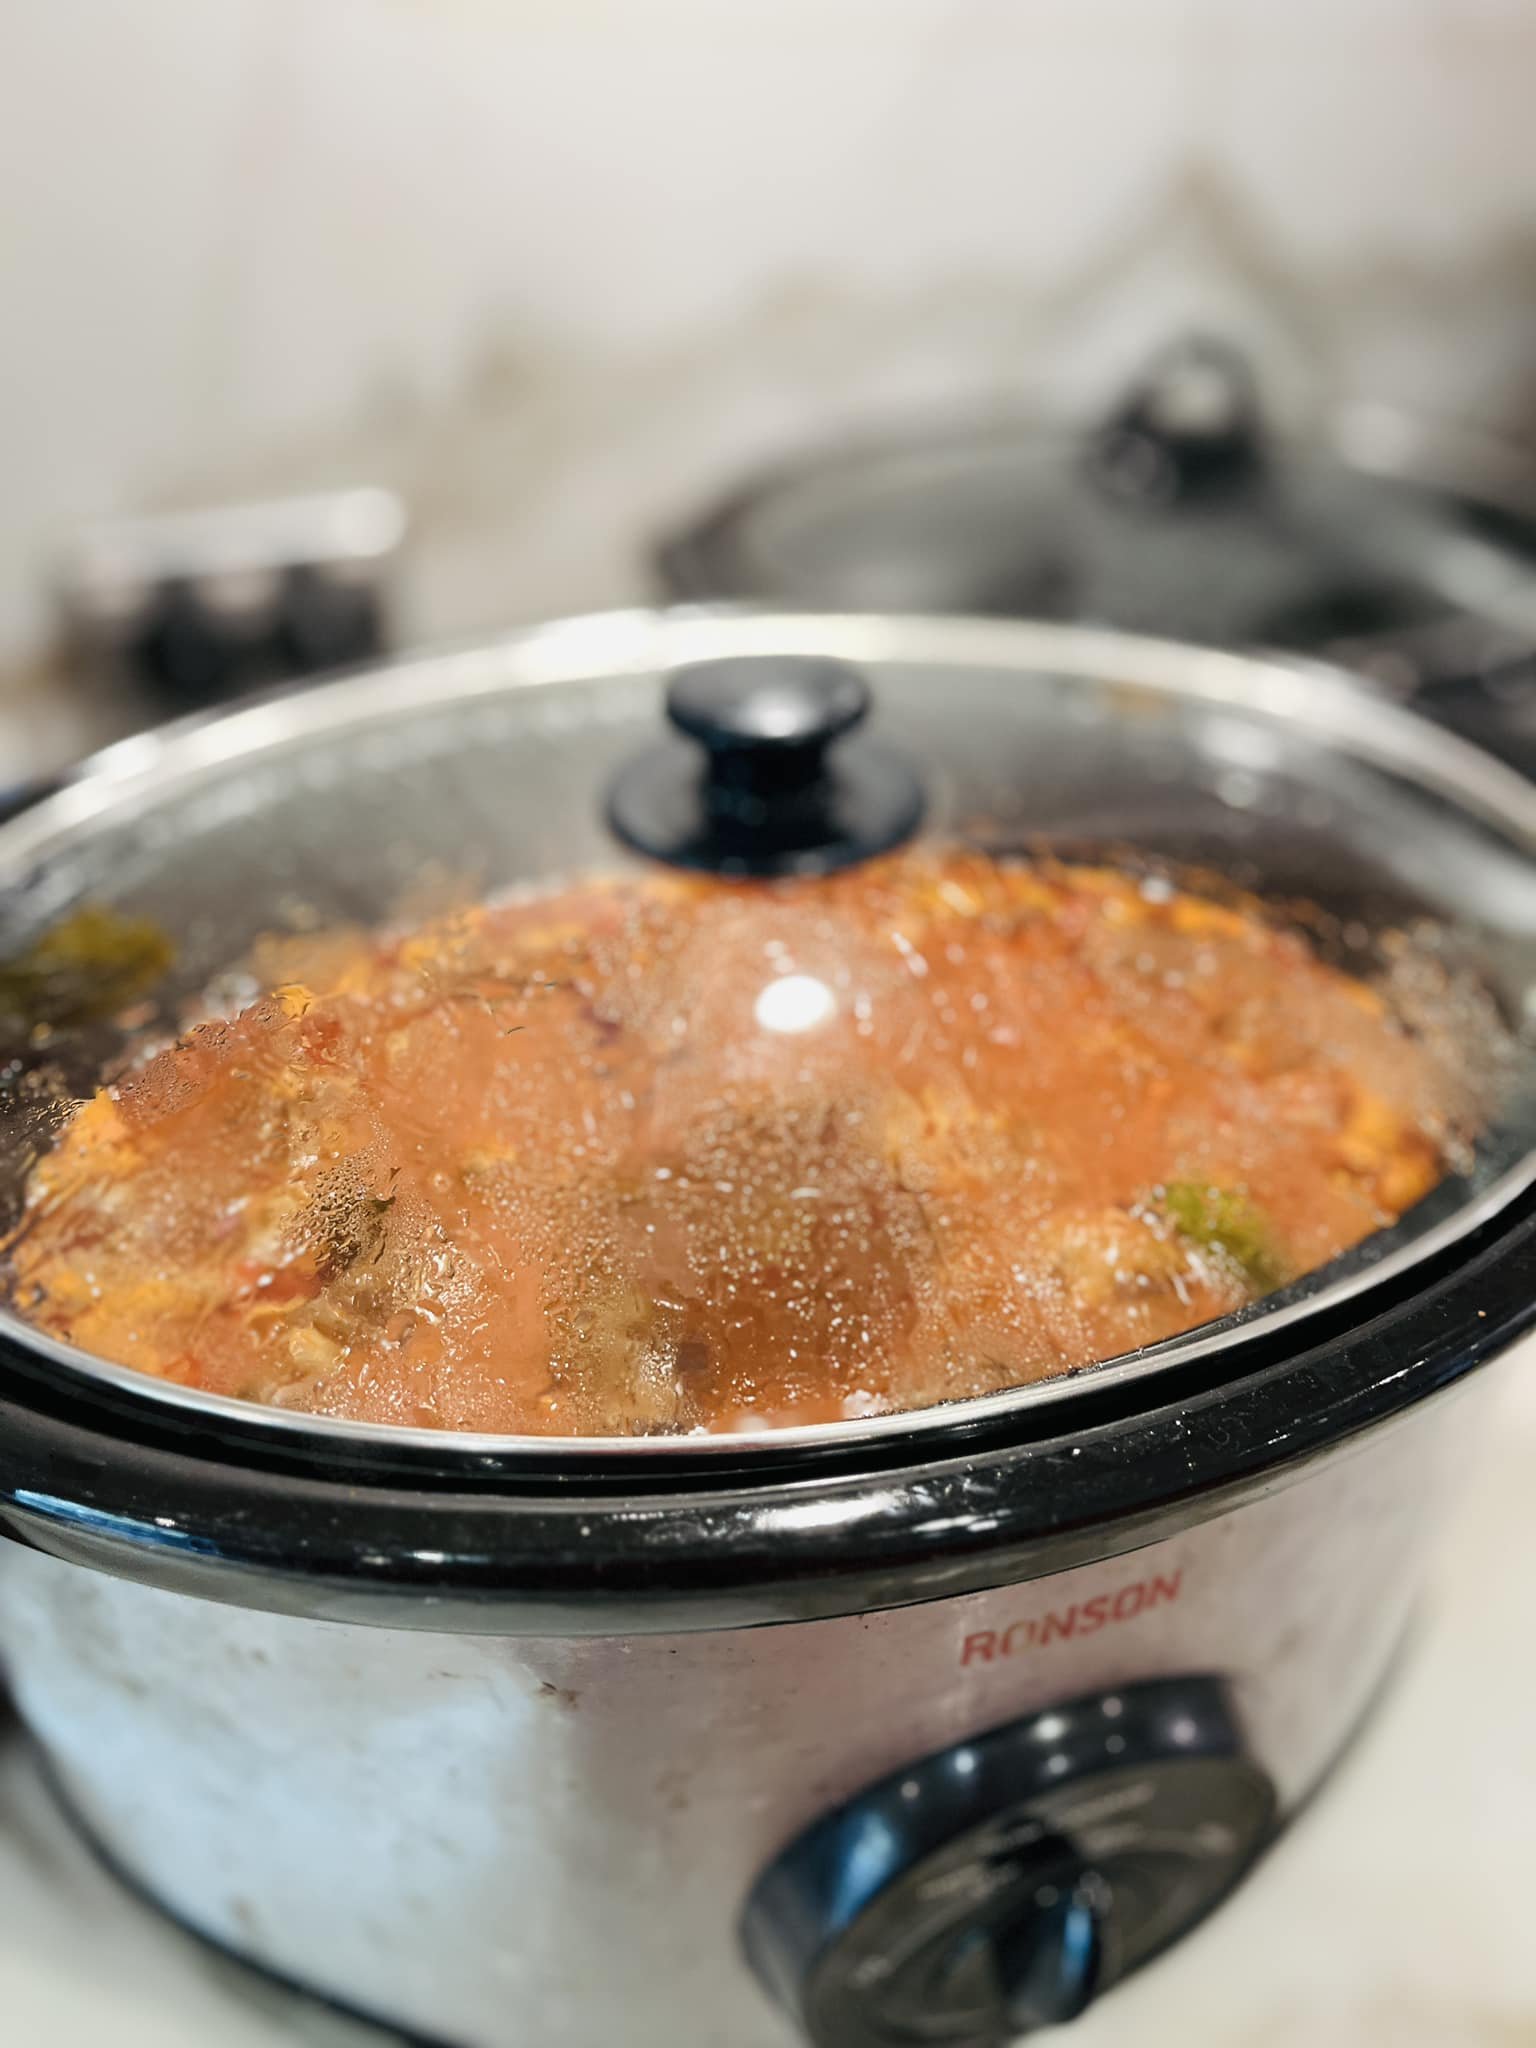 Duo of slow cookers on for family meal prep&hellip;.

Grass fed beef bolognese and a lamb loin chop yellow curry, delicious

Meat thanks to Farmgate to Plate